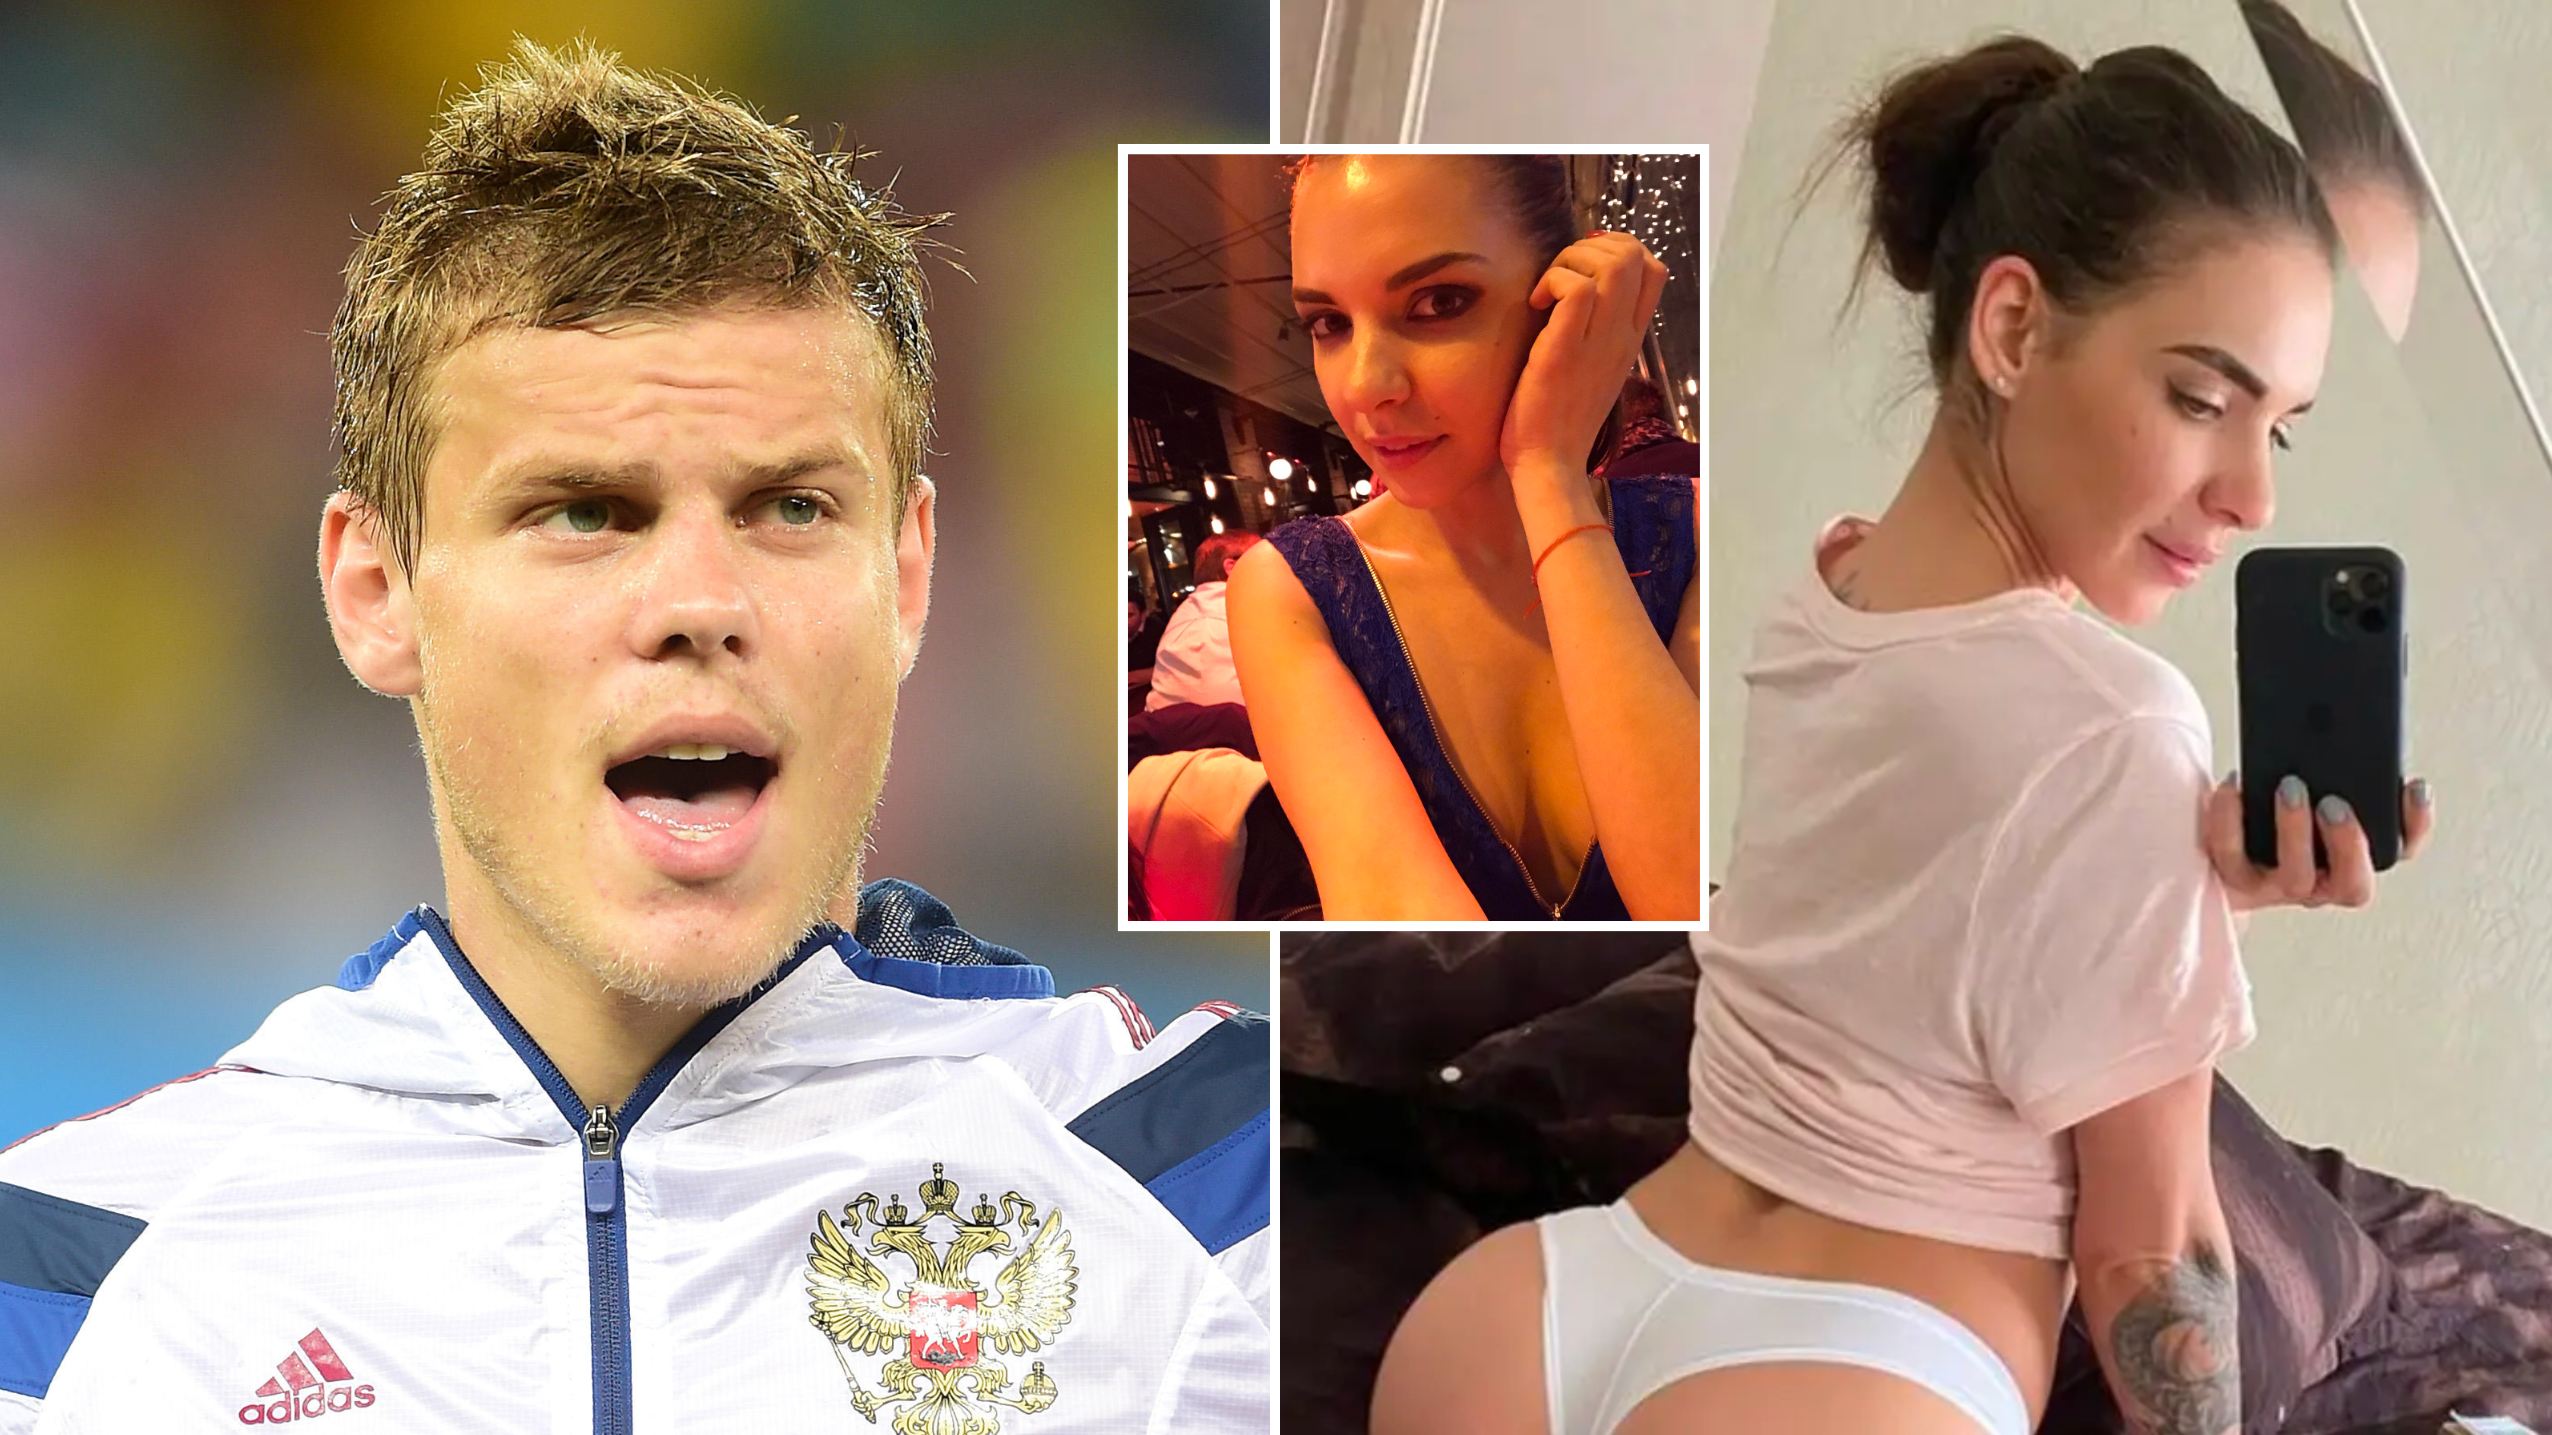 Russian Footballer Offered 16-Hour Sex Session By Porn Star If He Scored Five Goals